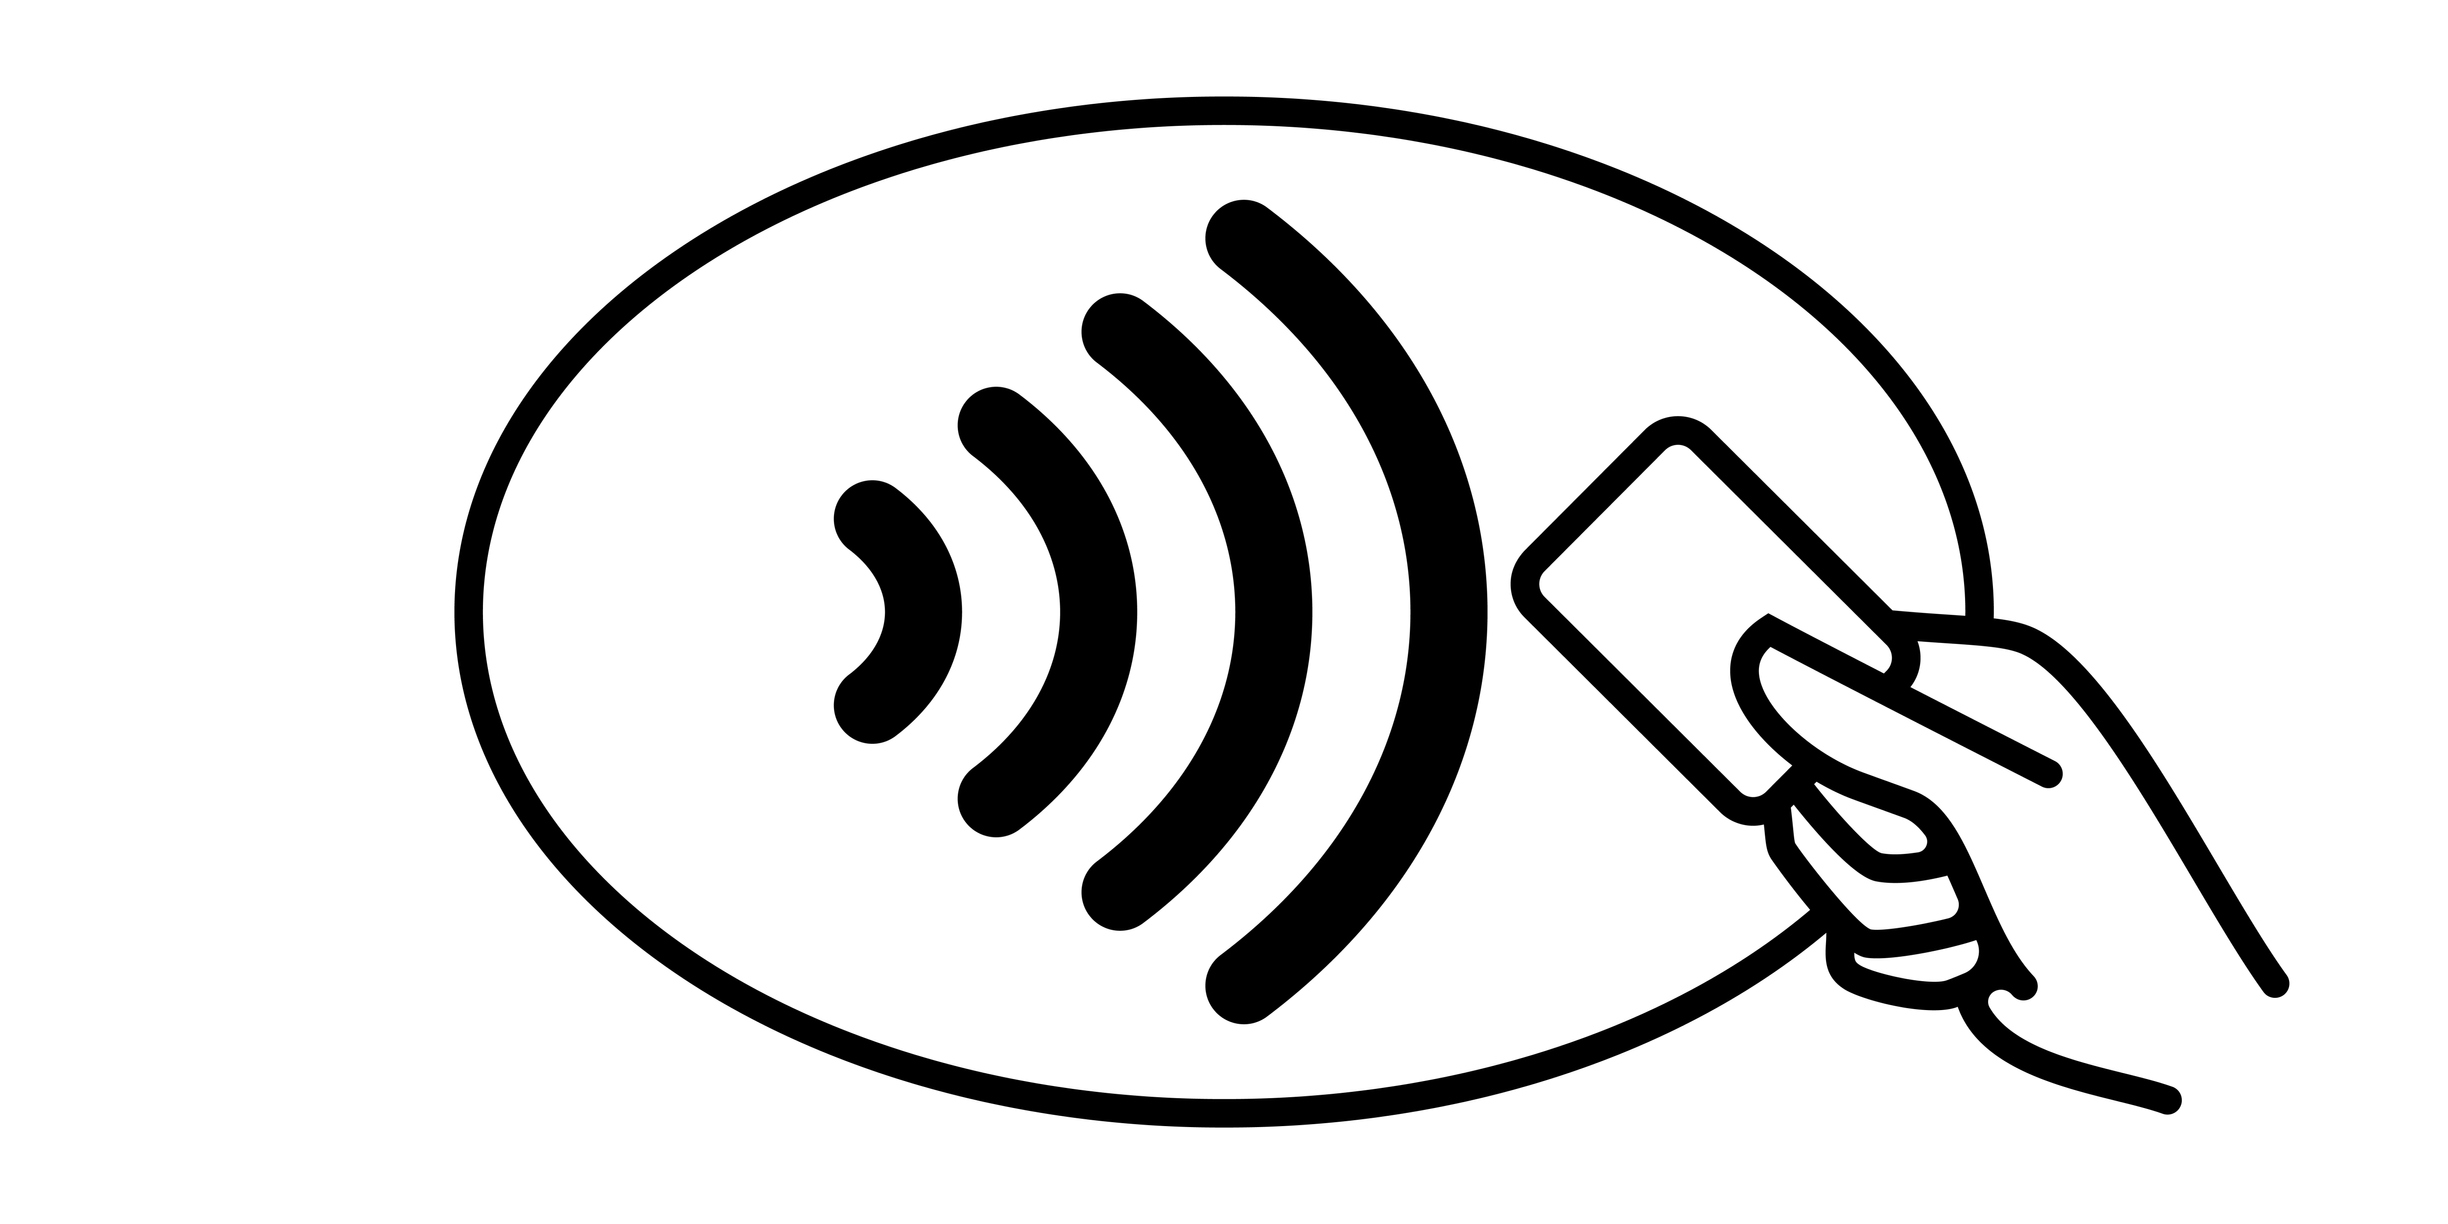 Most credit cards in Australia are contactless-enabled. Just look for the four-curved line symbol on your card. It’s the same one you’ll see at a store’s EFTPOS machine or payment terminal.